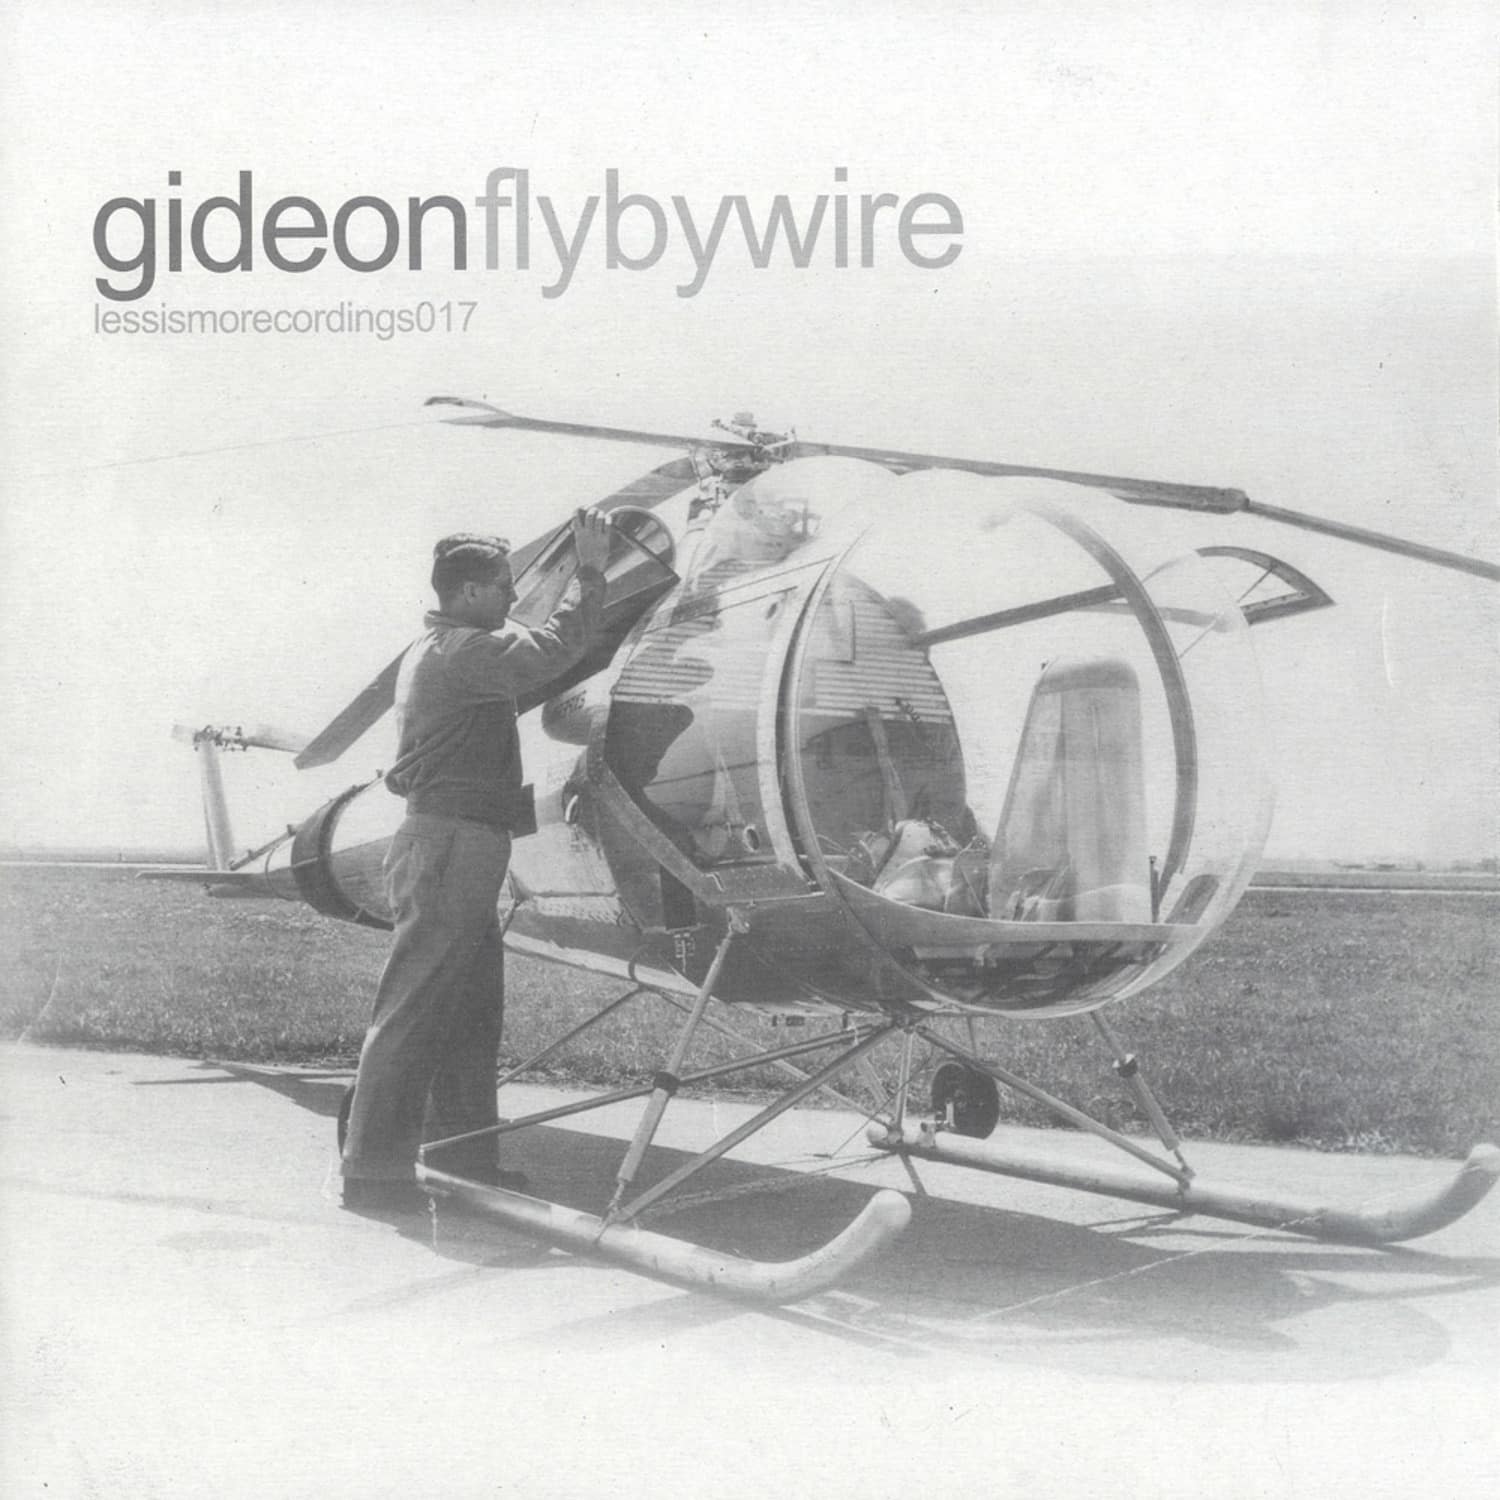 Gideon - FLY BY WIRE